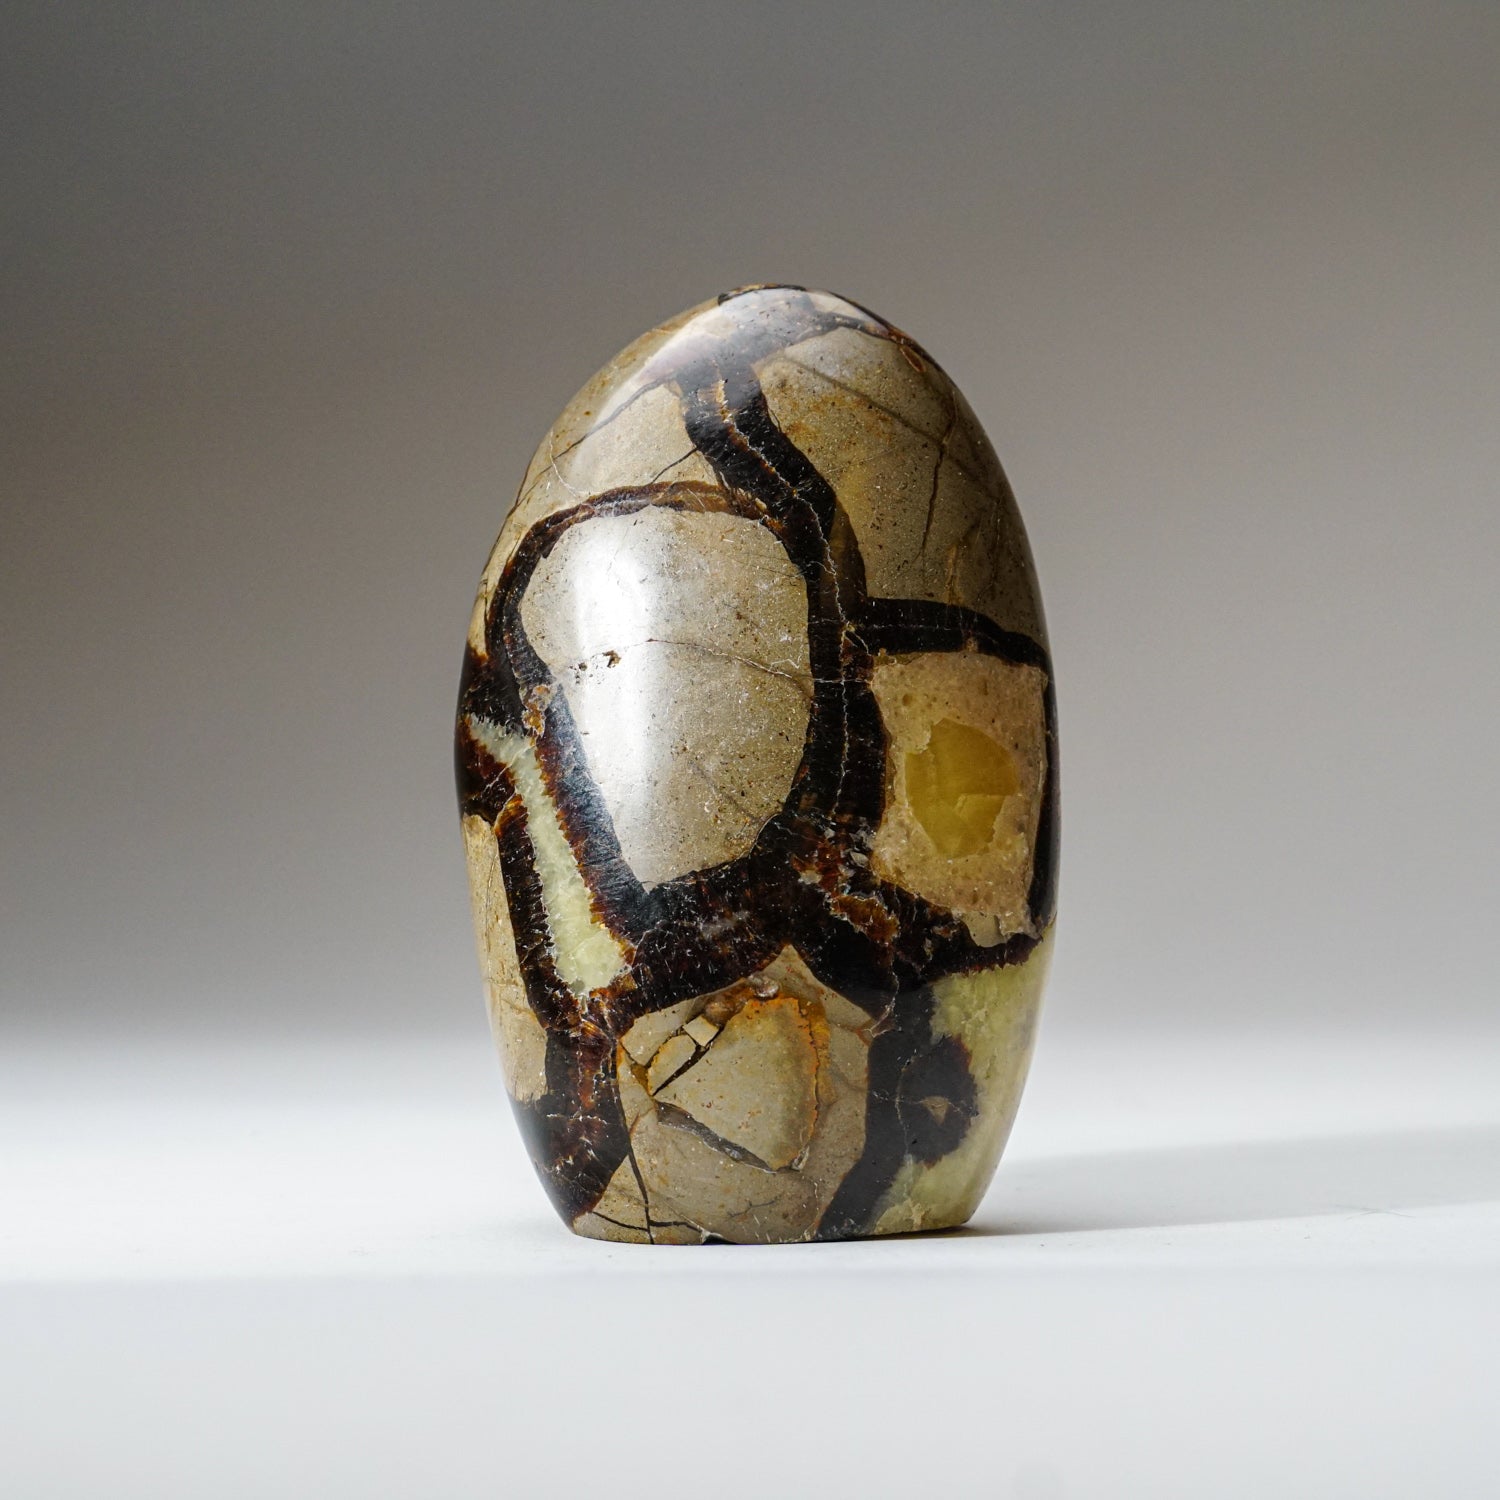 Polished Septarian Freeform from Madagascar (1.6 lbs)